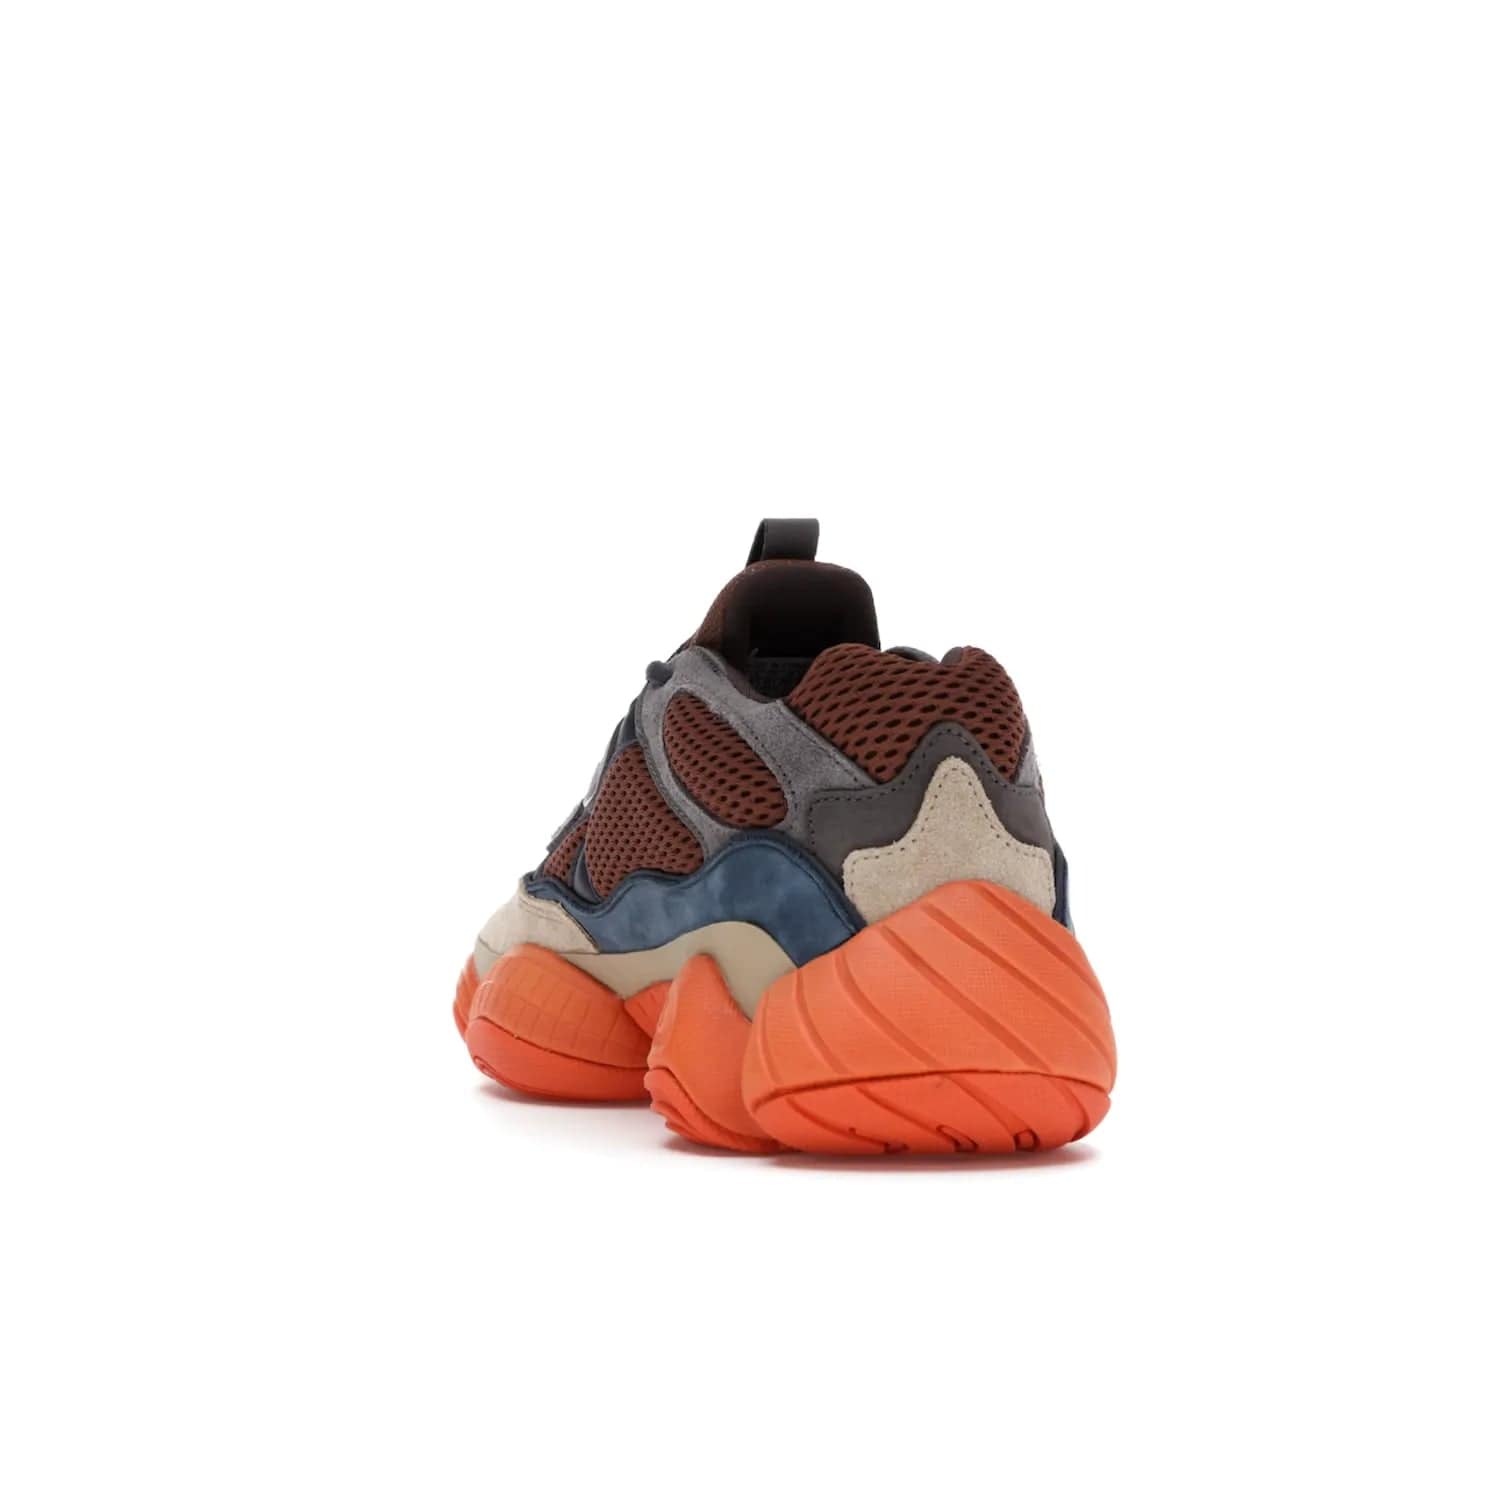 adidas Yeezy 500 Enflame - Image 26 - Only at www.BallersClubKickz.com - Step into style with the adidas Yeezy 500 Enflame. Mix of mesh, leather, and suede layered together to create tonal-brown, dark blue, & orange. Orange AdiPRENE sole provides superior cushioning & comfort. Get yours and experience maximum style.